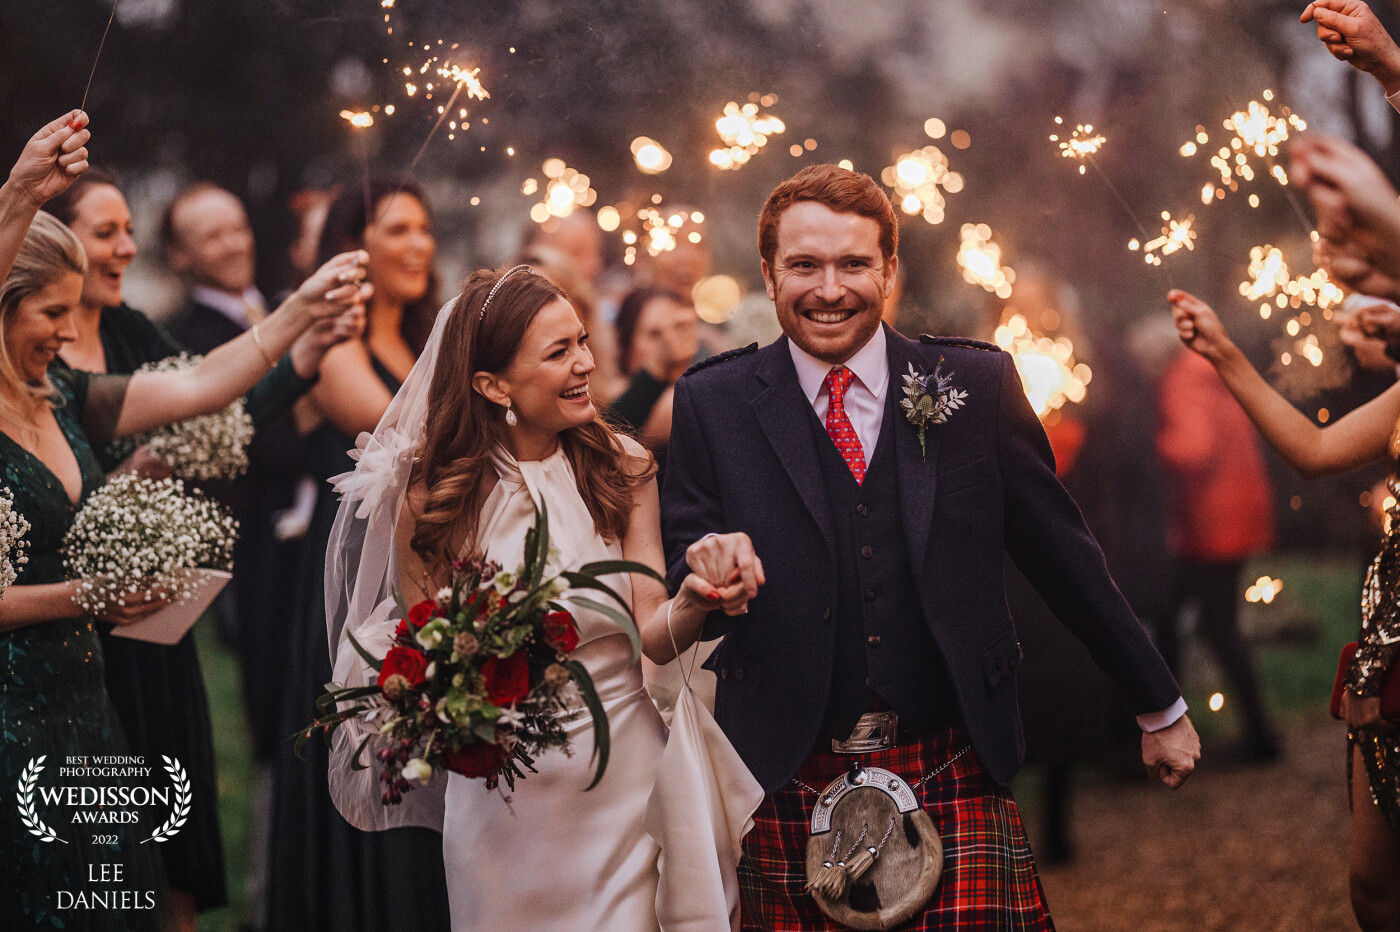 A 1500 ceremony in winter isn't what photographers really want to hear, but this sparker exit sure lit up the scene at Molly & Ross's beautiful DIY wedding